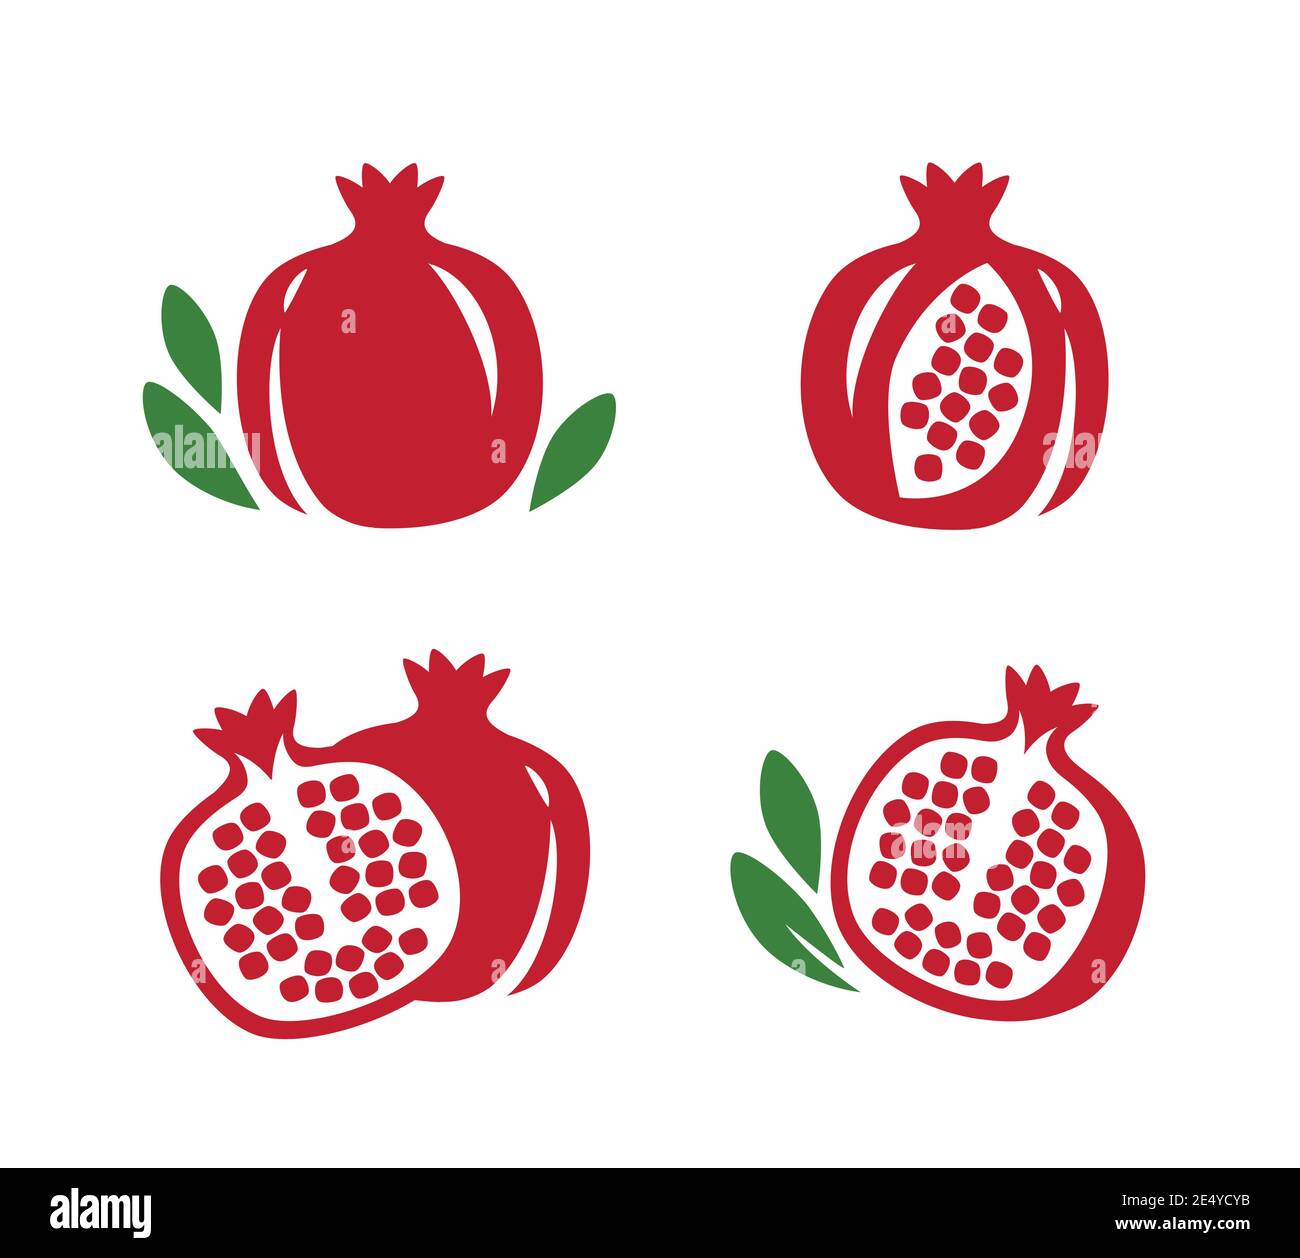 Whole and cut pomegranate icon set. Fruit vector illustration Stock Vector